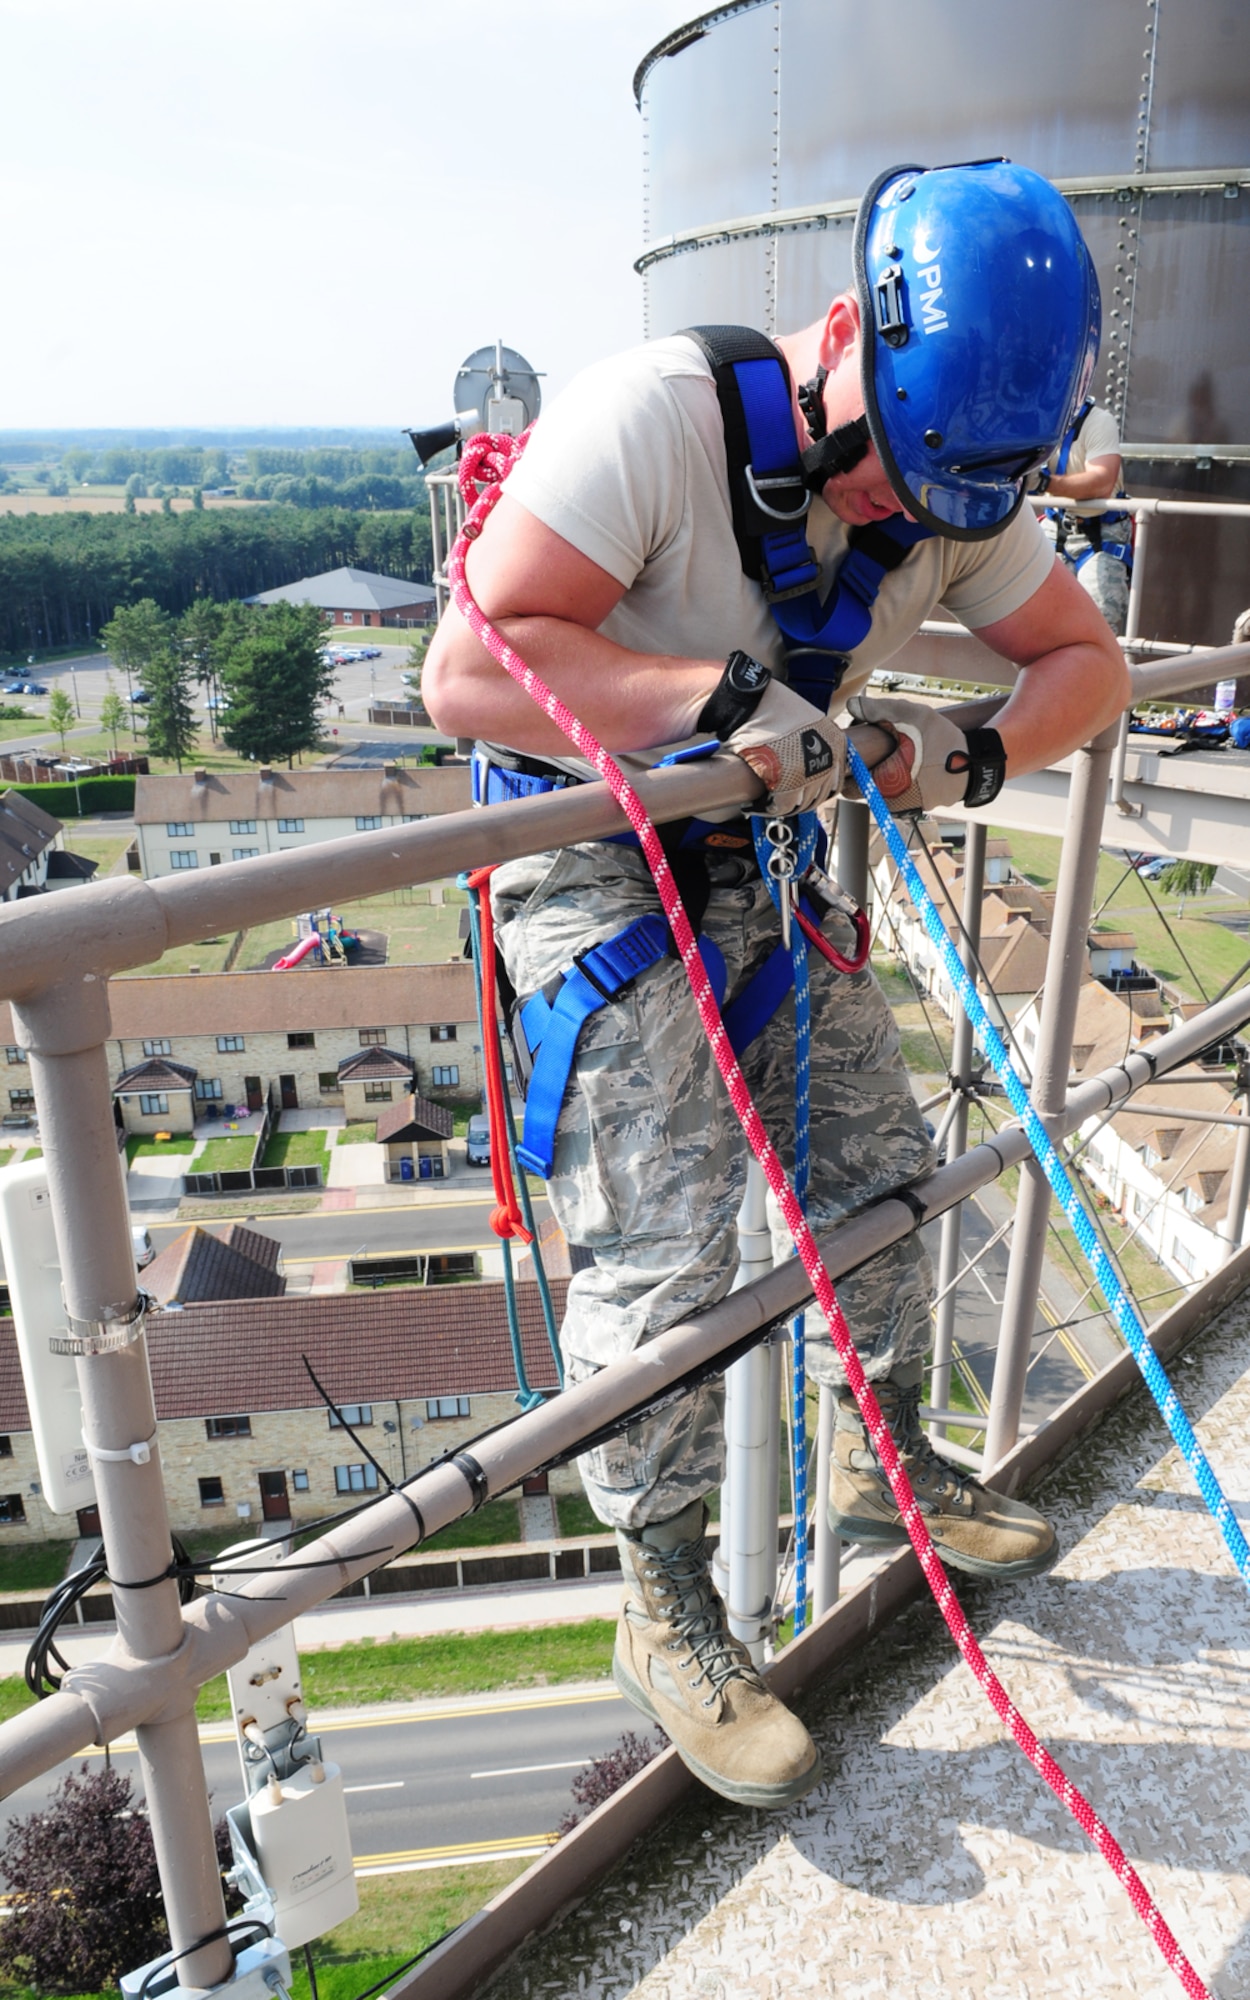 U.S. Air Force Airman 1st Class Jacob Dietmeyer, 100th Civil Engineer Squadron Fire Department firefighter from Gurnee, Ill., performs a final safety check on his belay line before descending almost 120 feet from a water tower Sept. 4, 2013, during technical rope rescue training on RAF Mildenhall, England. Instructors from the 435th Construction and Training Squadron, Ramstein Air Base, Germany, spent time at the 100th CES Fire Department training firefighters on a variety of rescue techniques and scenarios including incident management training, mechanical advantage systems, and low and high angle rescue. This training is vital to keep first responders proficient in procedures, in the event a rescue requires such skills. (U.S. Air Force photo by Karen Abeyasekere/Released)